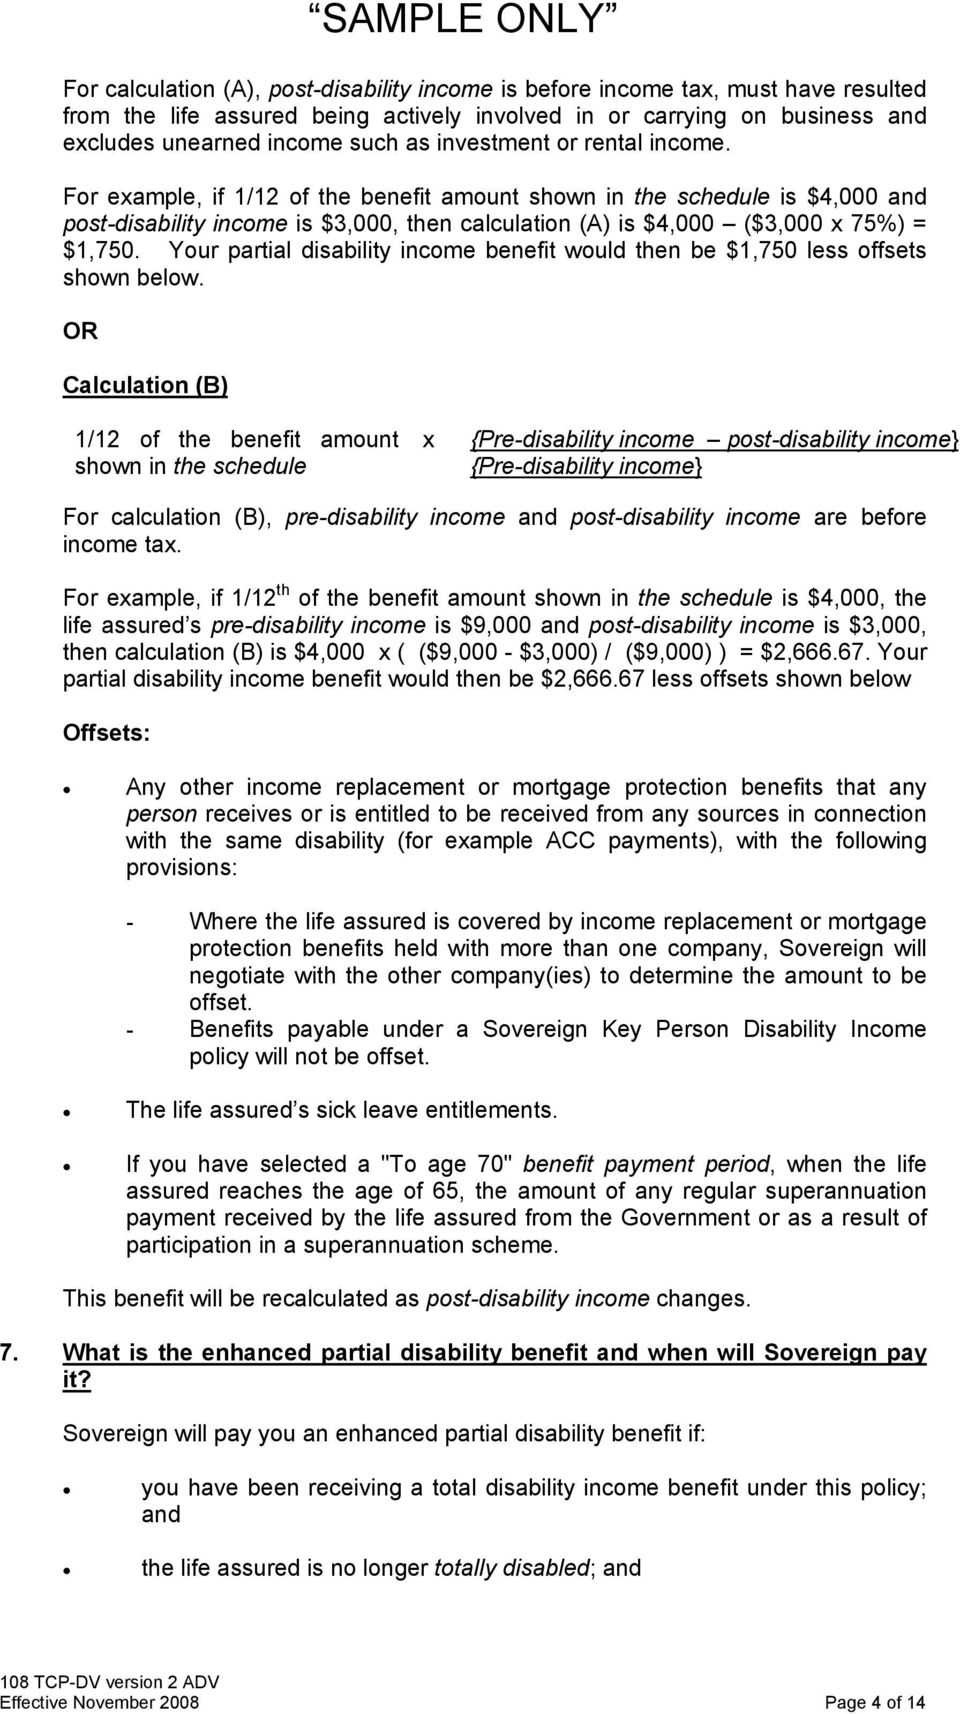 Your partial disability income benefit would then be $1,750 less offsets shown below.